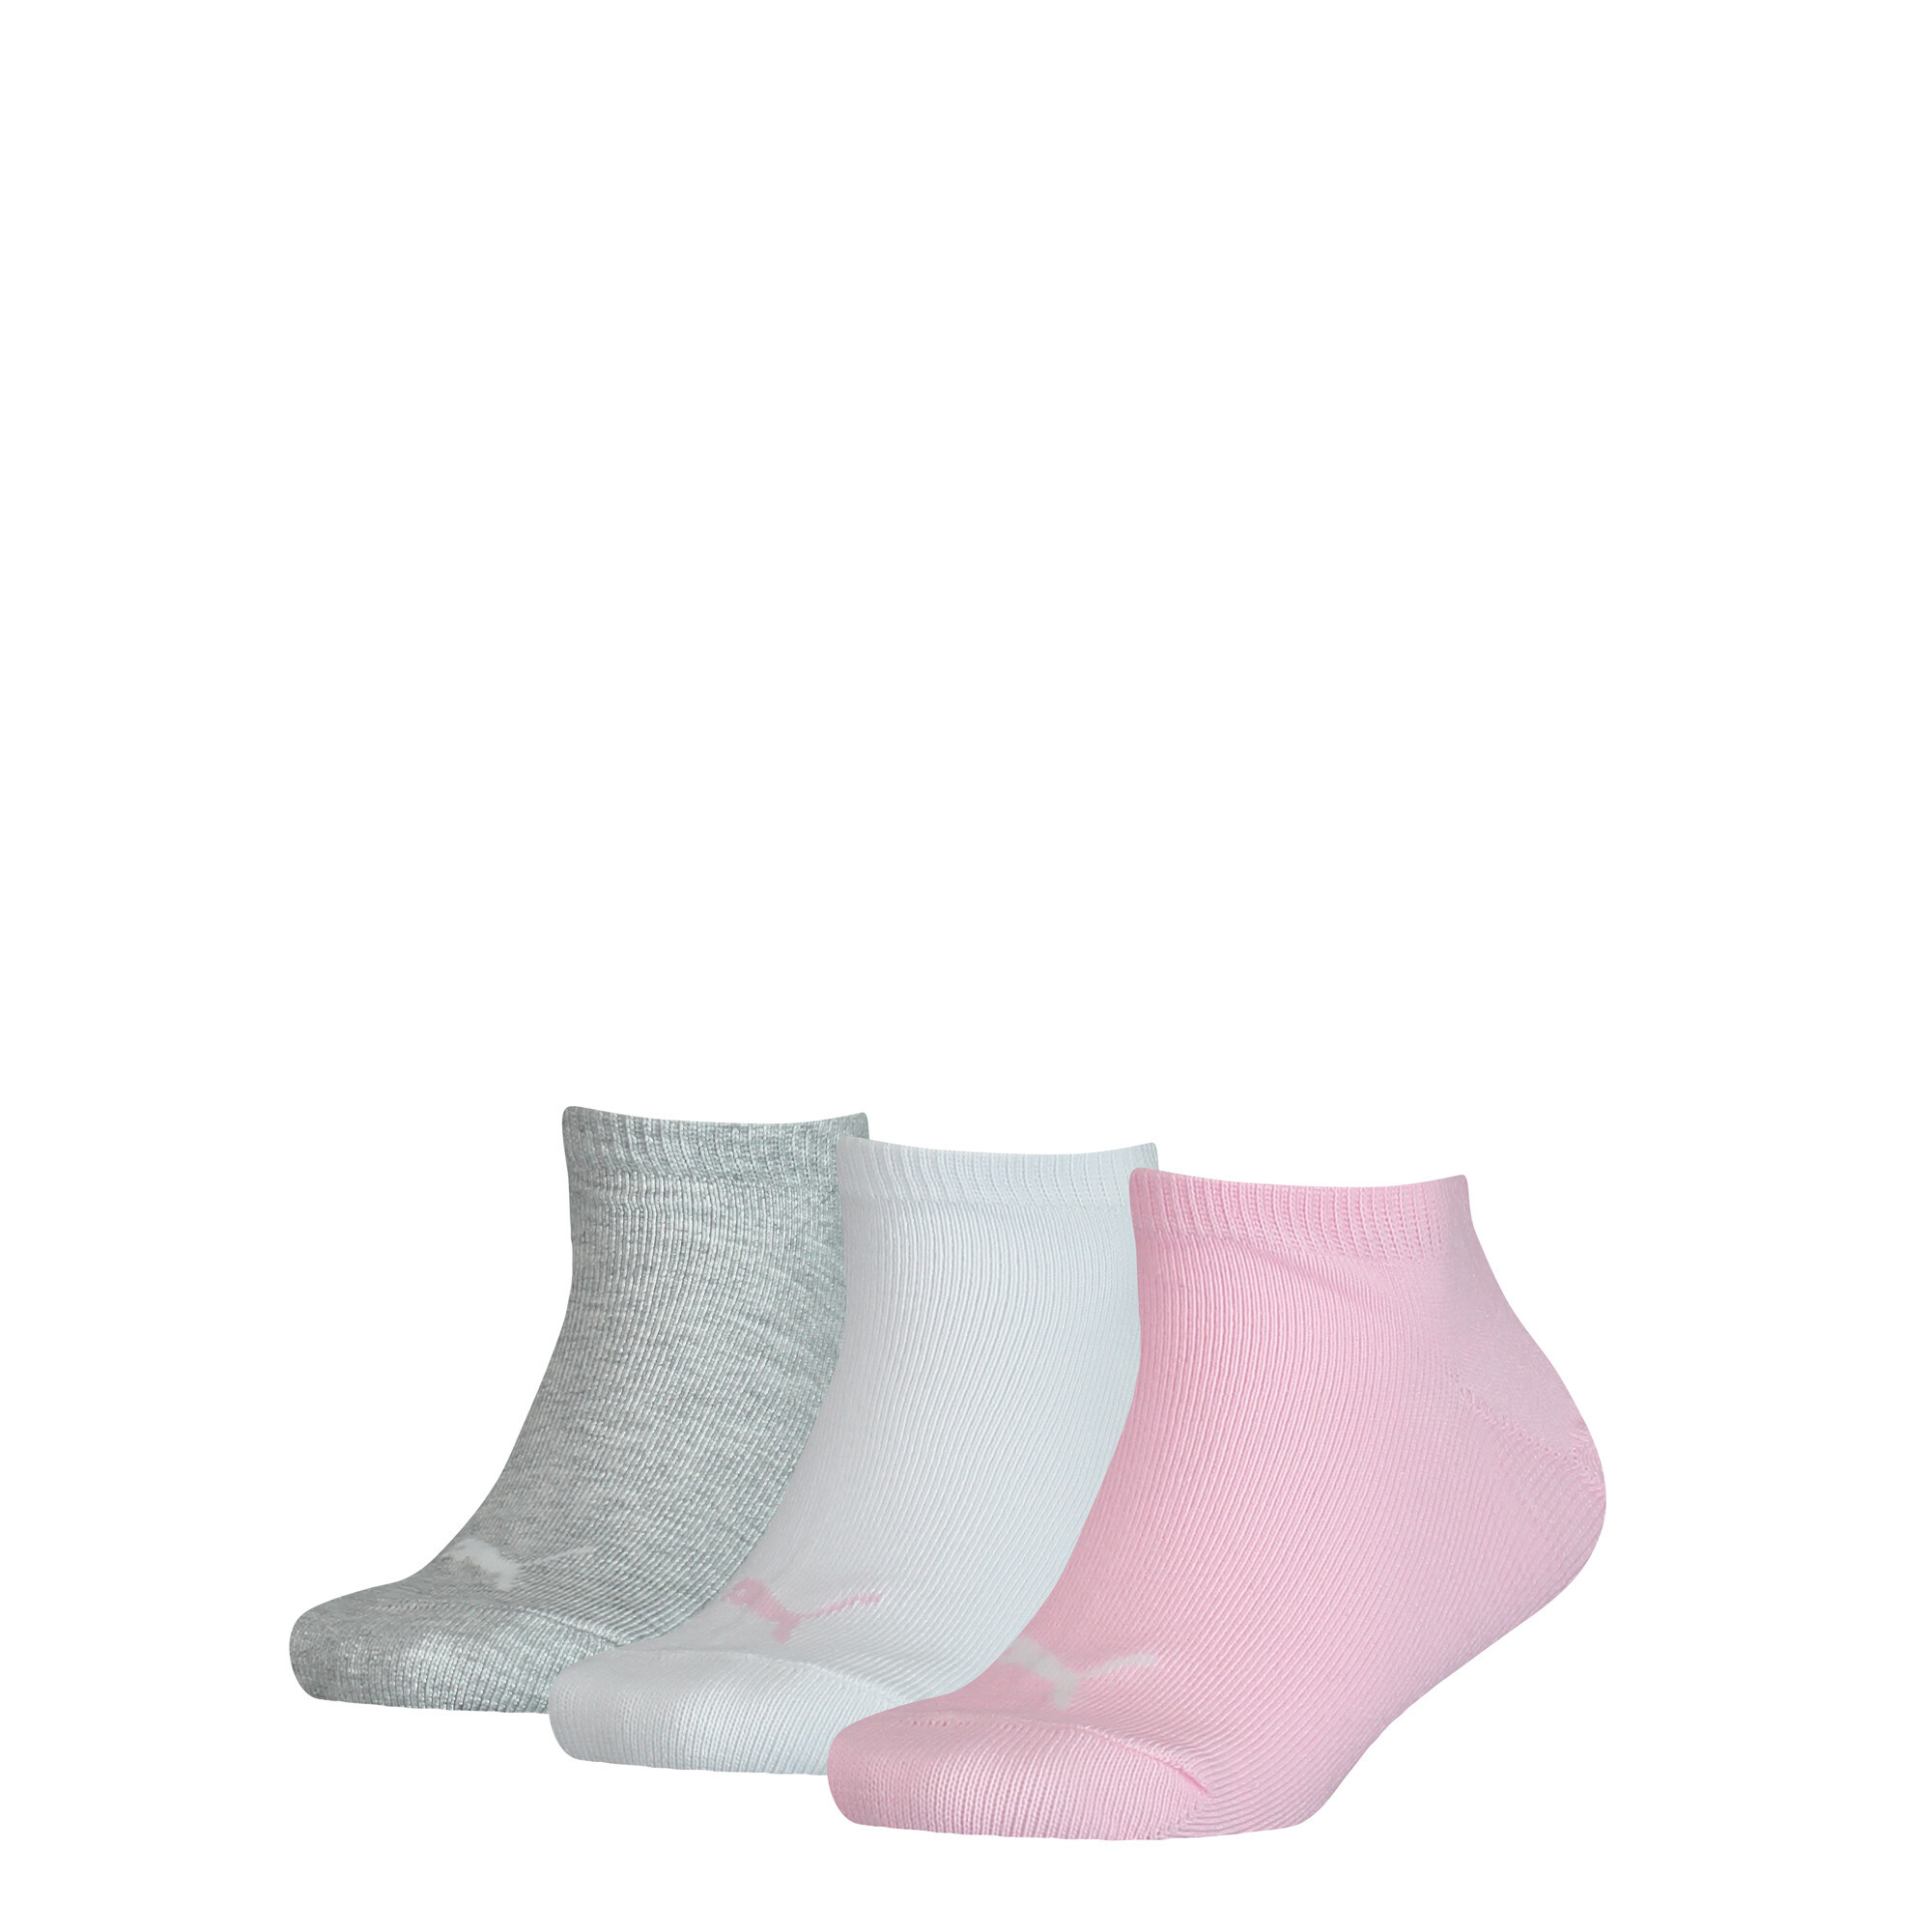 Kids' PUMA Invisible Socks 3 Pack In Rose Water, Size 23-26